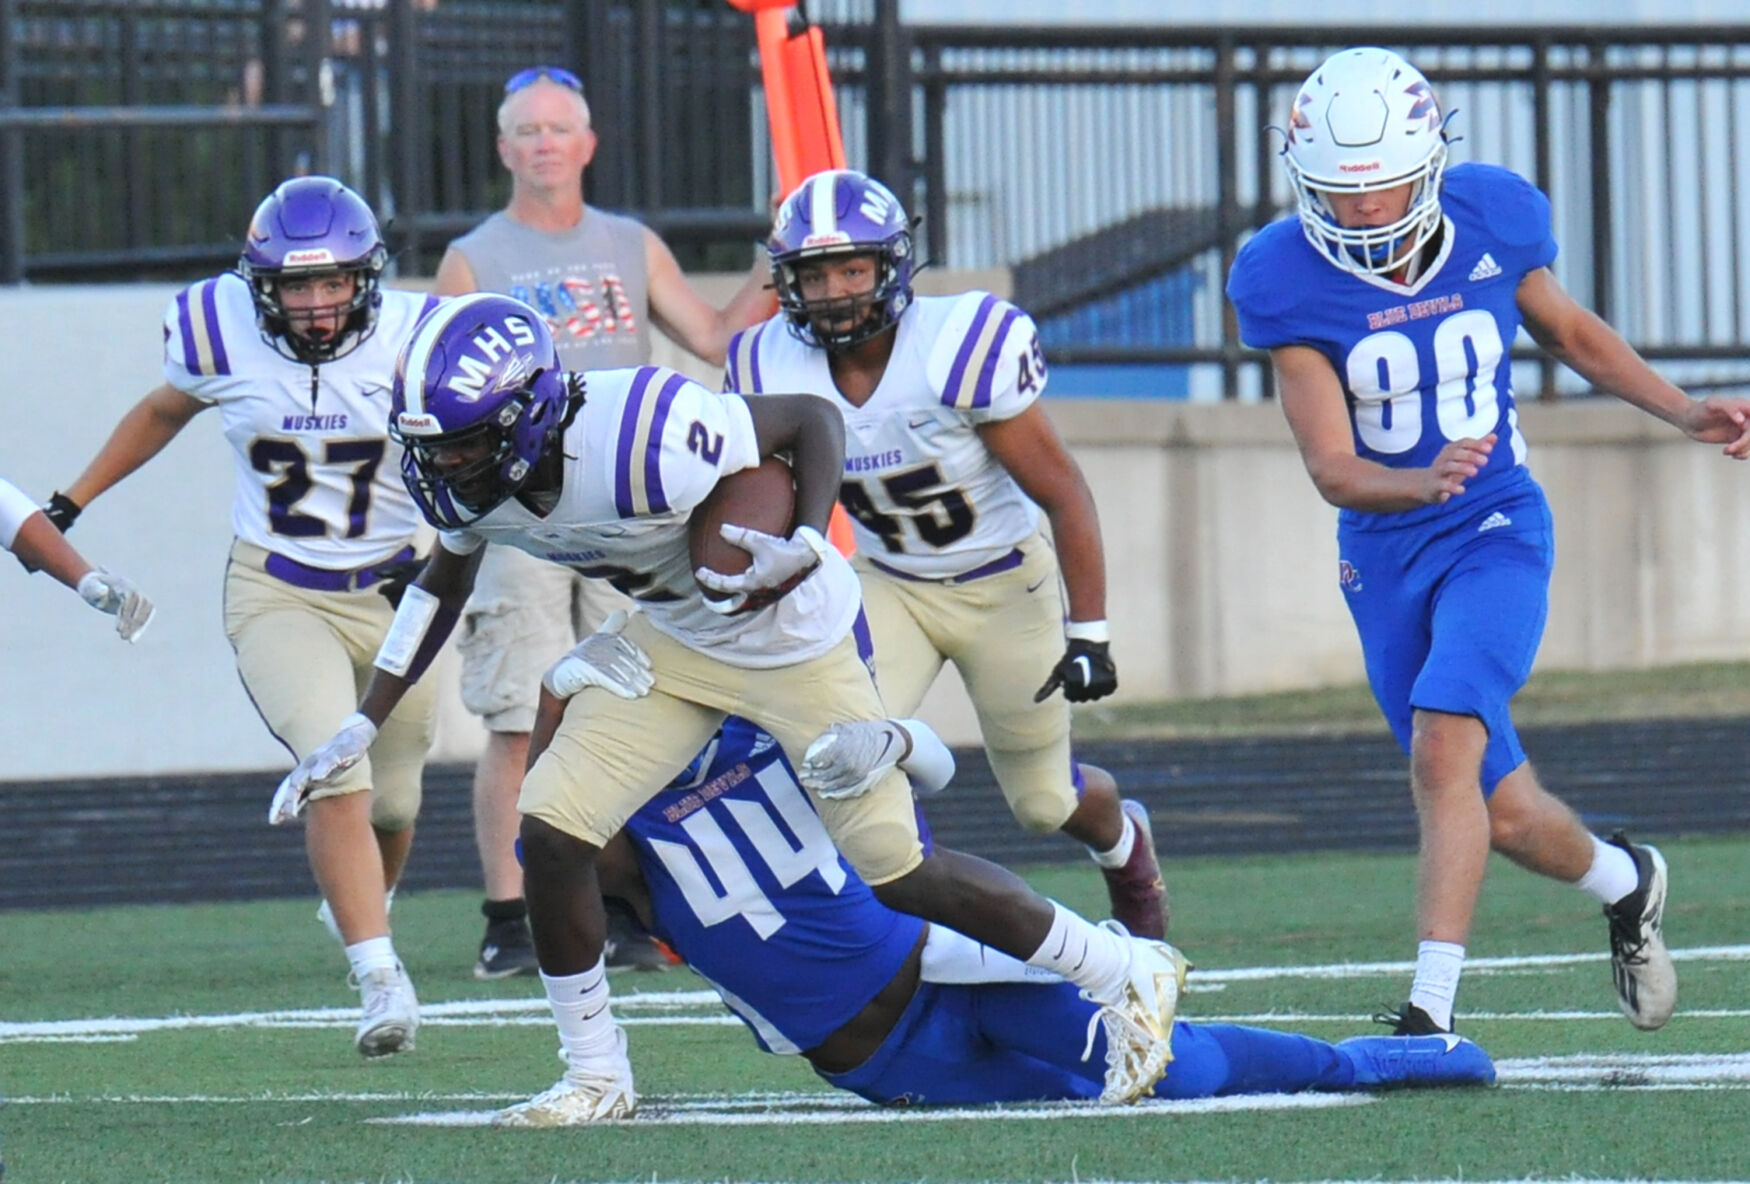 Muscatine Muskies secure thrilling 14-13 victory over Davenport Central Blue Devils